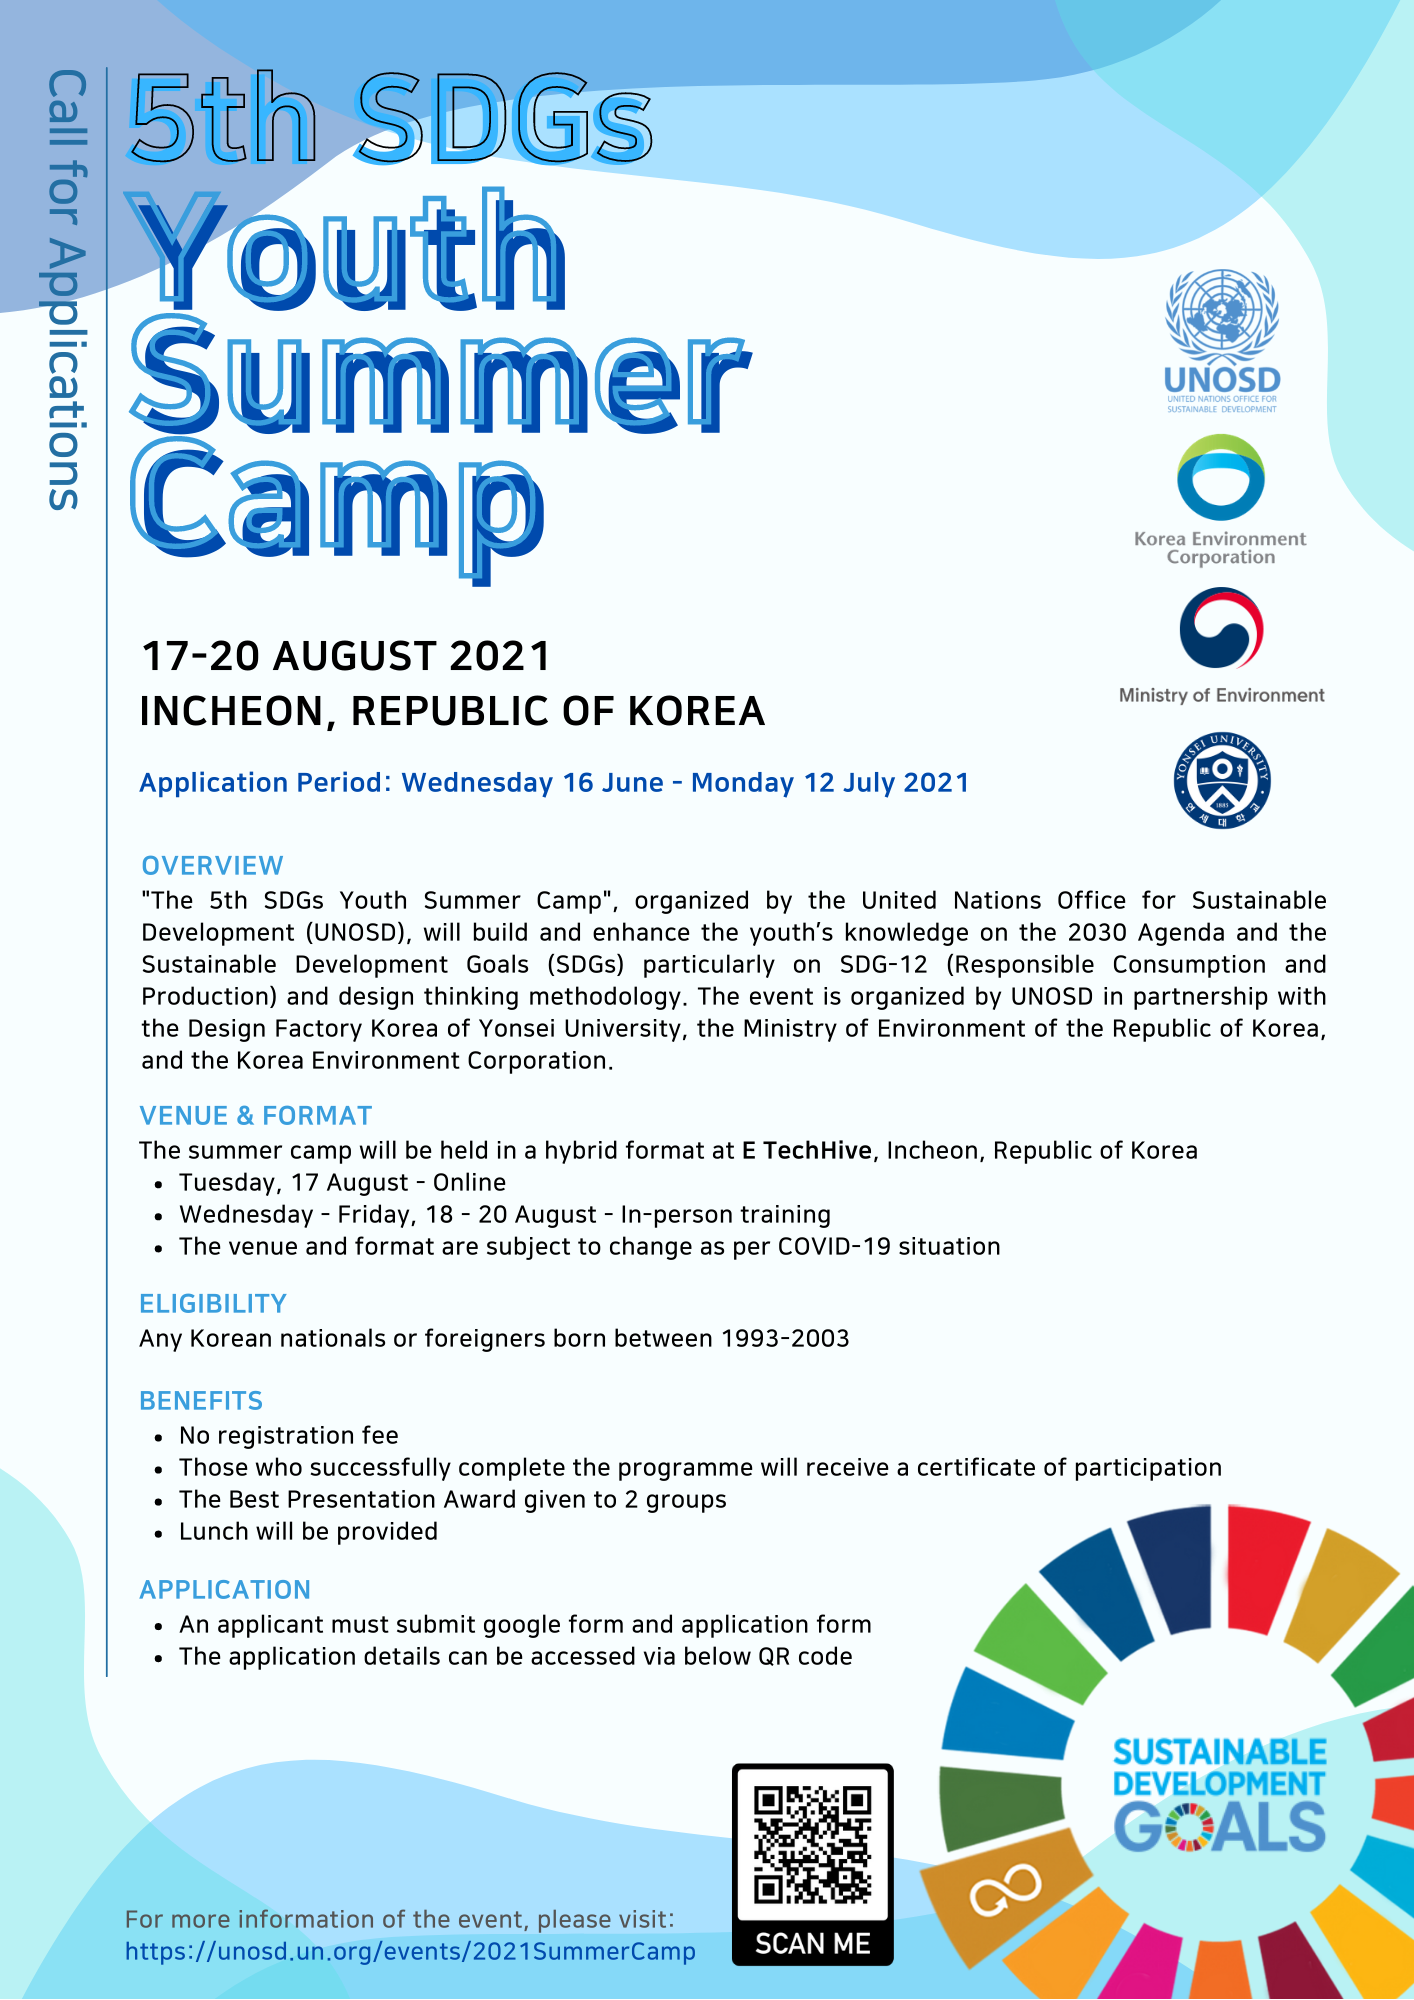 5th SDGs Youth Summer Camp
17-20 AUGUST 2021 INCHEON, REPUBLIC OF KOREA
Application Period: Wednesday 16 June - Monday 12 July 2021

OVERVIEW
'The 5th SDGs Youth Summer Camp', organized by the United Nations Office for Sustainable Development(UNOSD), will build and enhance the youth's knowledge on the 2030 Agenda and the Sustainable Development Goals(SDGs) particularly on SDG-12(Responsible Consumption and Production) and design thinking methodology. The event is organized by UNOSD in partnership with the Design Factory Korea of Yonsei University, the ministry of Environment of the Republic of Korea, and the Korea Environment Corporation.

VENUE & FORMAT
The summer camp will be held in a hybrid format at E TechHive, Incheon, Republic of Korea
· Tuesday, 17 August - Online
· Wednesday - Friday, 18 - 20 August - In - person training
· The venue and format are subject to change as per COVID-19 situation

ELIGIBILITY
Any Korean nationals or foreigners born between 1993-2003

BENEFITS
· No registration fee
· Those who successfully complete the programme will receive a certificate of participation
· The Best Presentation Award given to 2 groups
· Lunch will be provided

APPLICATION
· An applicant must submit google form and application form
· The application details can be accessed via below QR code

For more information of the event, please visit:
https://unosd.un.org/events/2021SummerCamp
SCAN ME; QR code
SUSTAINABLE DEVELOPMENT GOALS